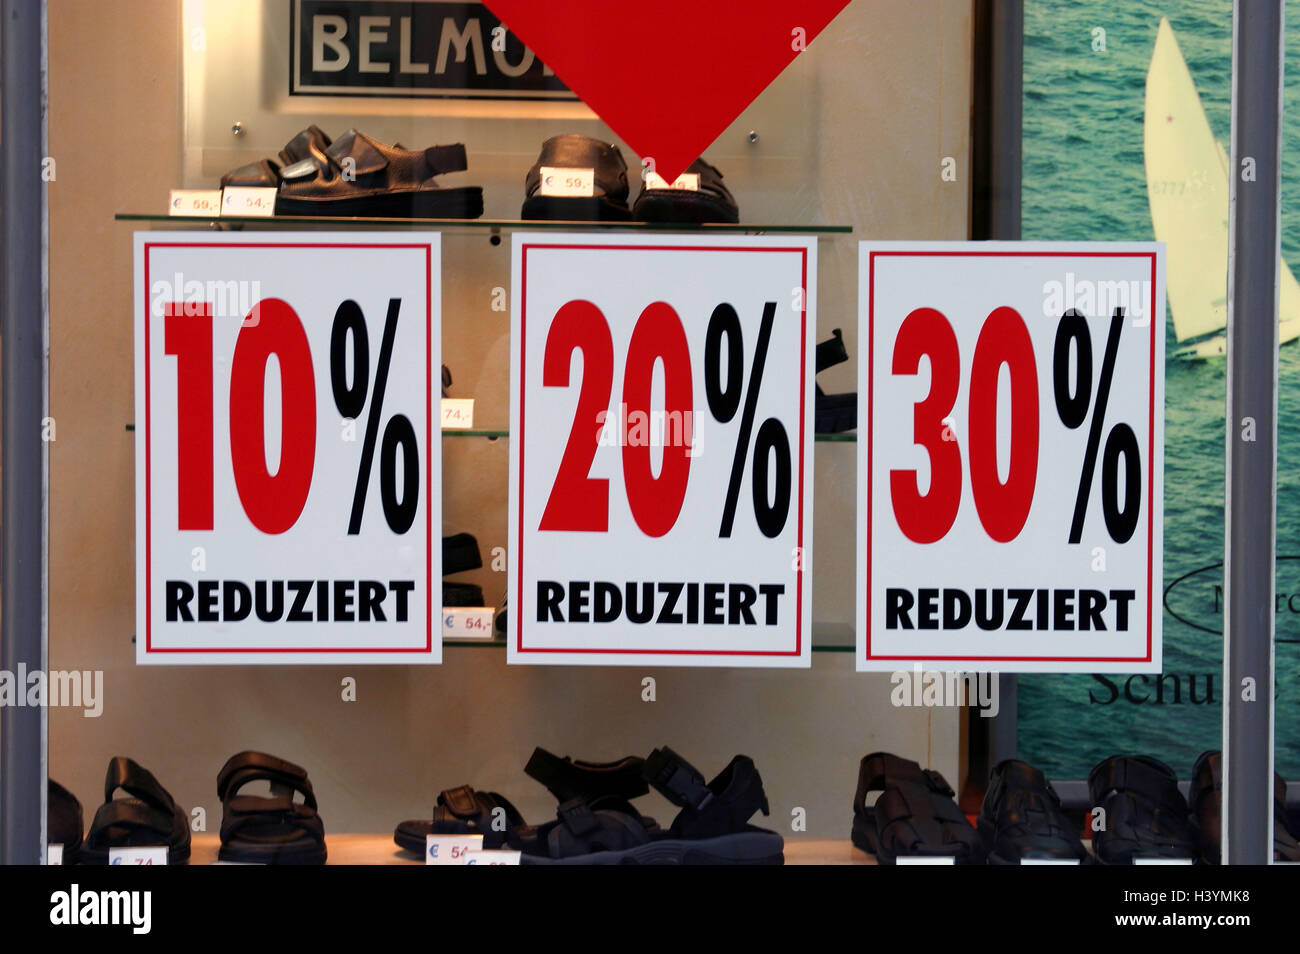 Shoe store, shop-window, signs, price 